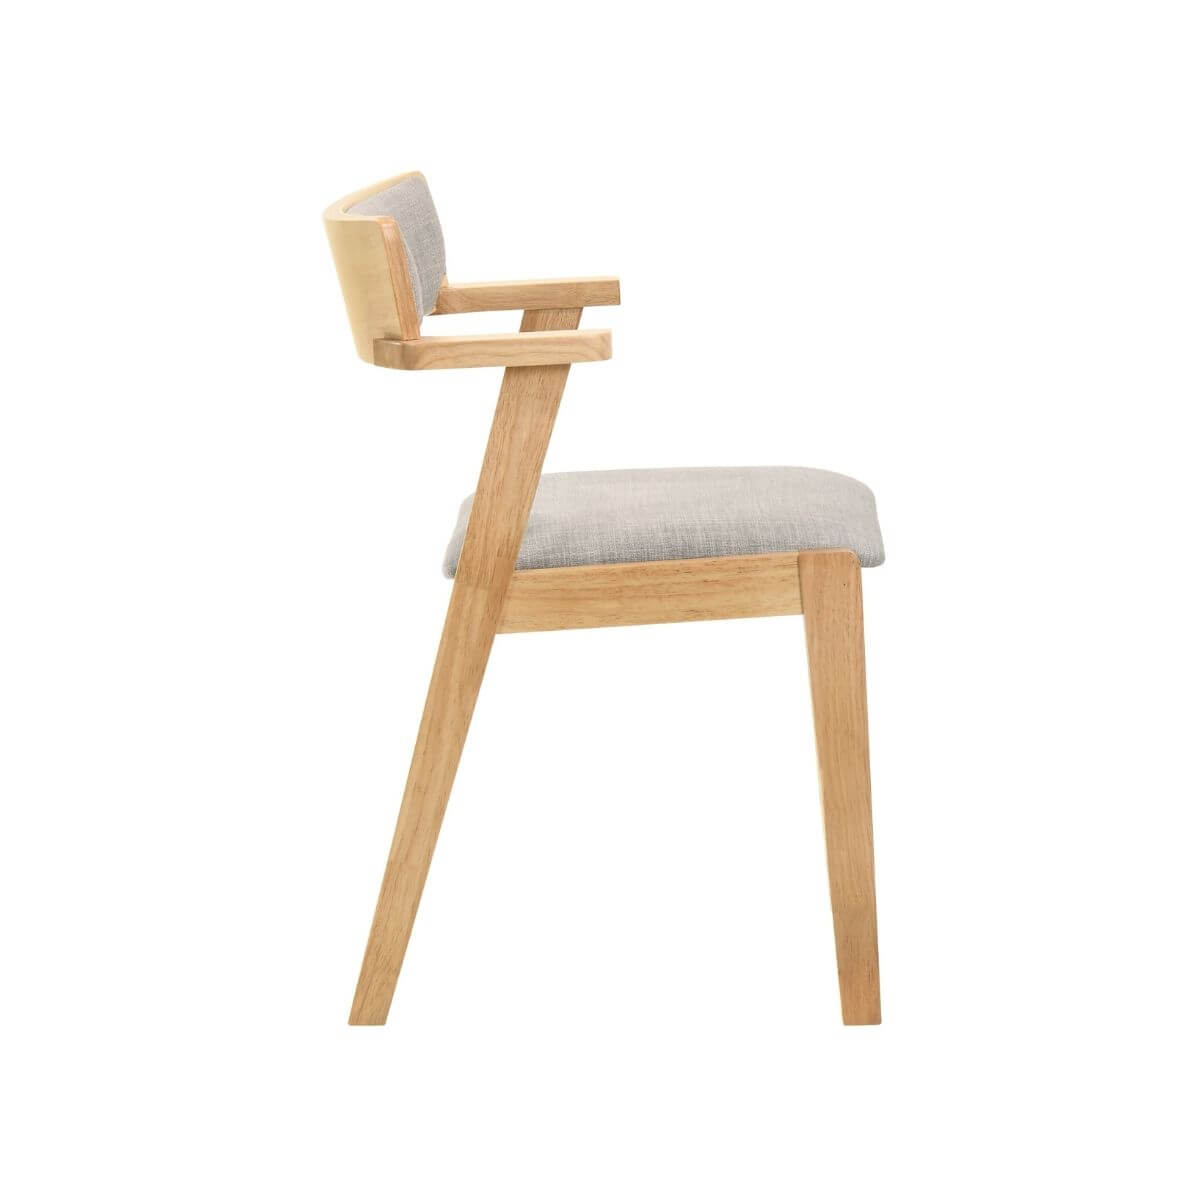 Elmo Dining Chair with Arm Rest in Natural-Upinteriors